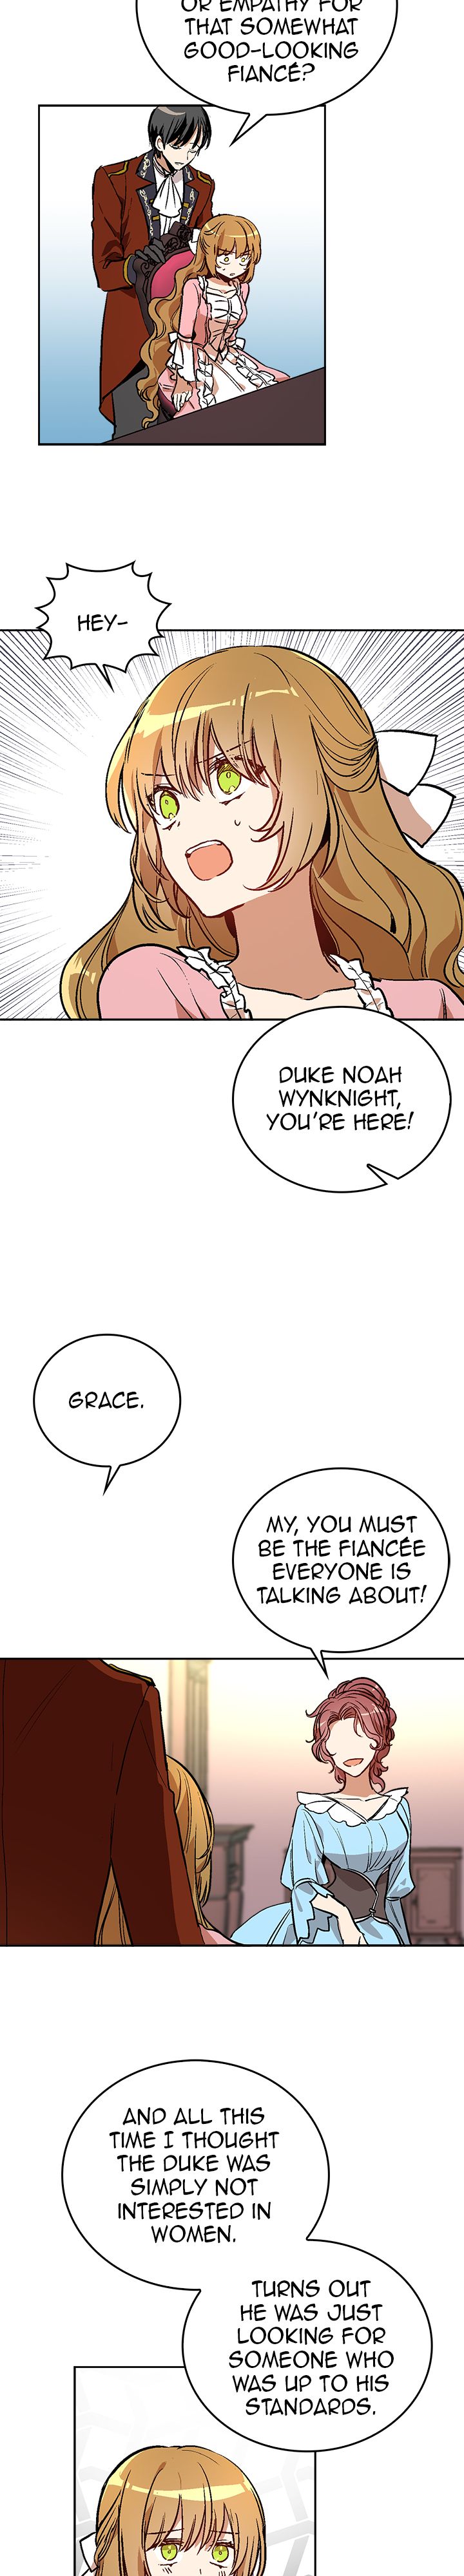 The Reason Why Raeliana Ended up at the Duke's Mansion Ch.44